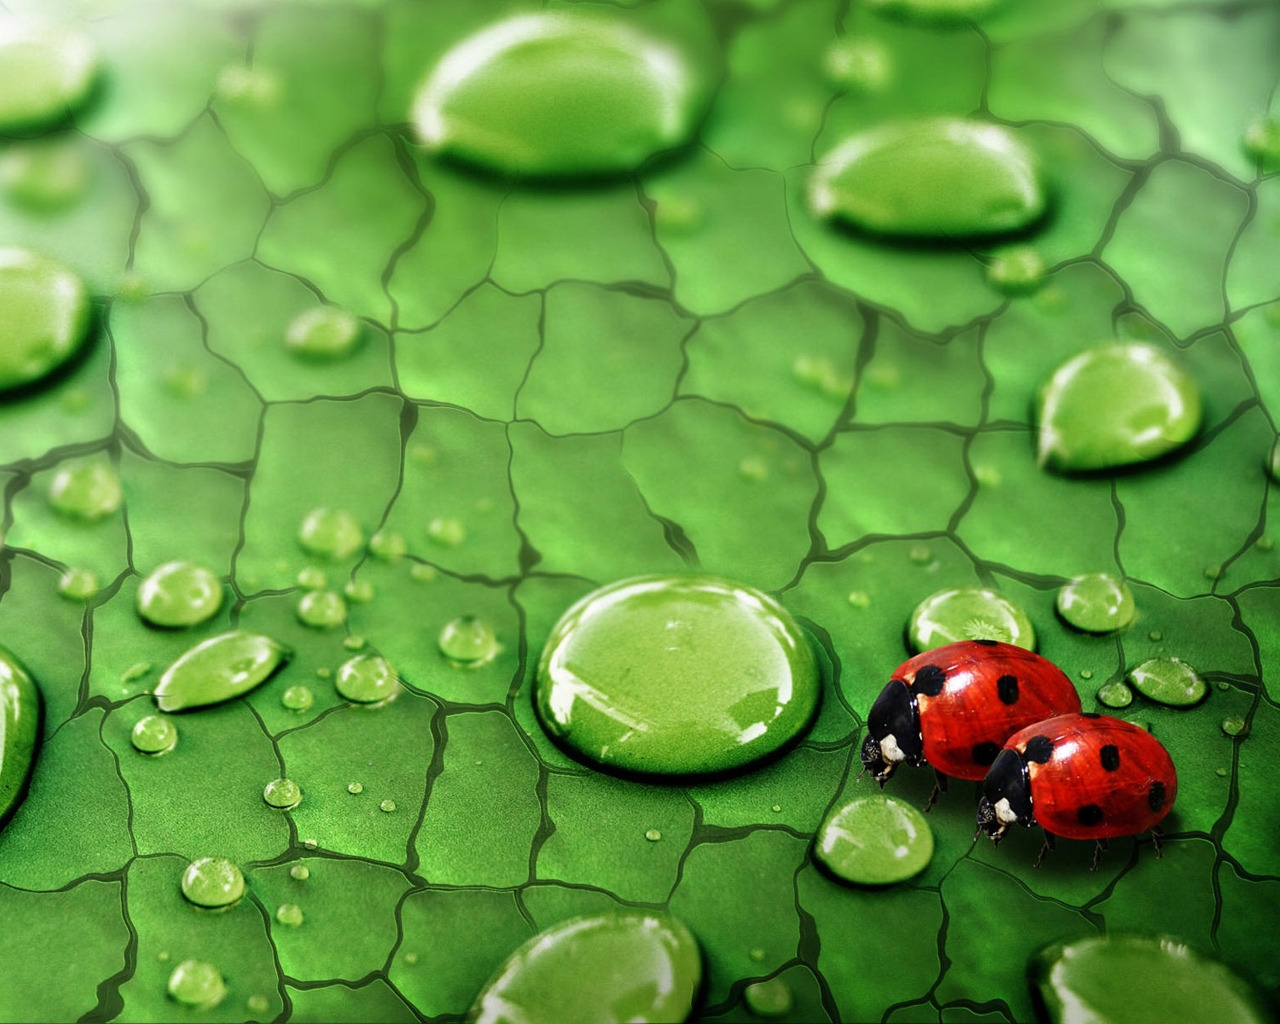 Ladybug In Love for 1280 x 1024 resolution